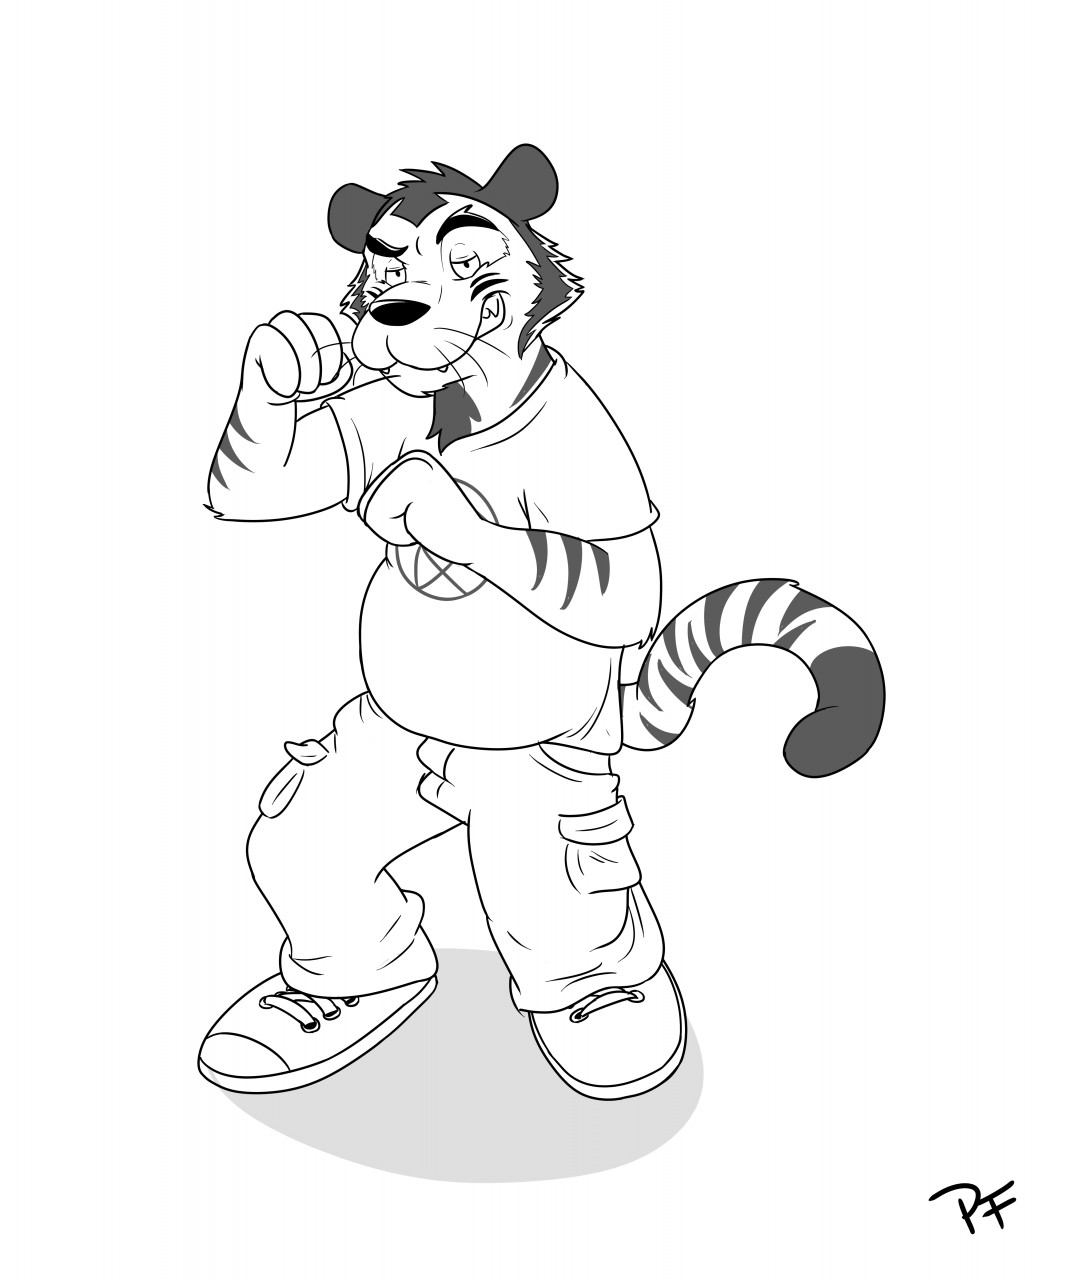 tony the tiger coloring page